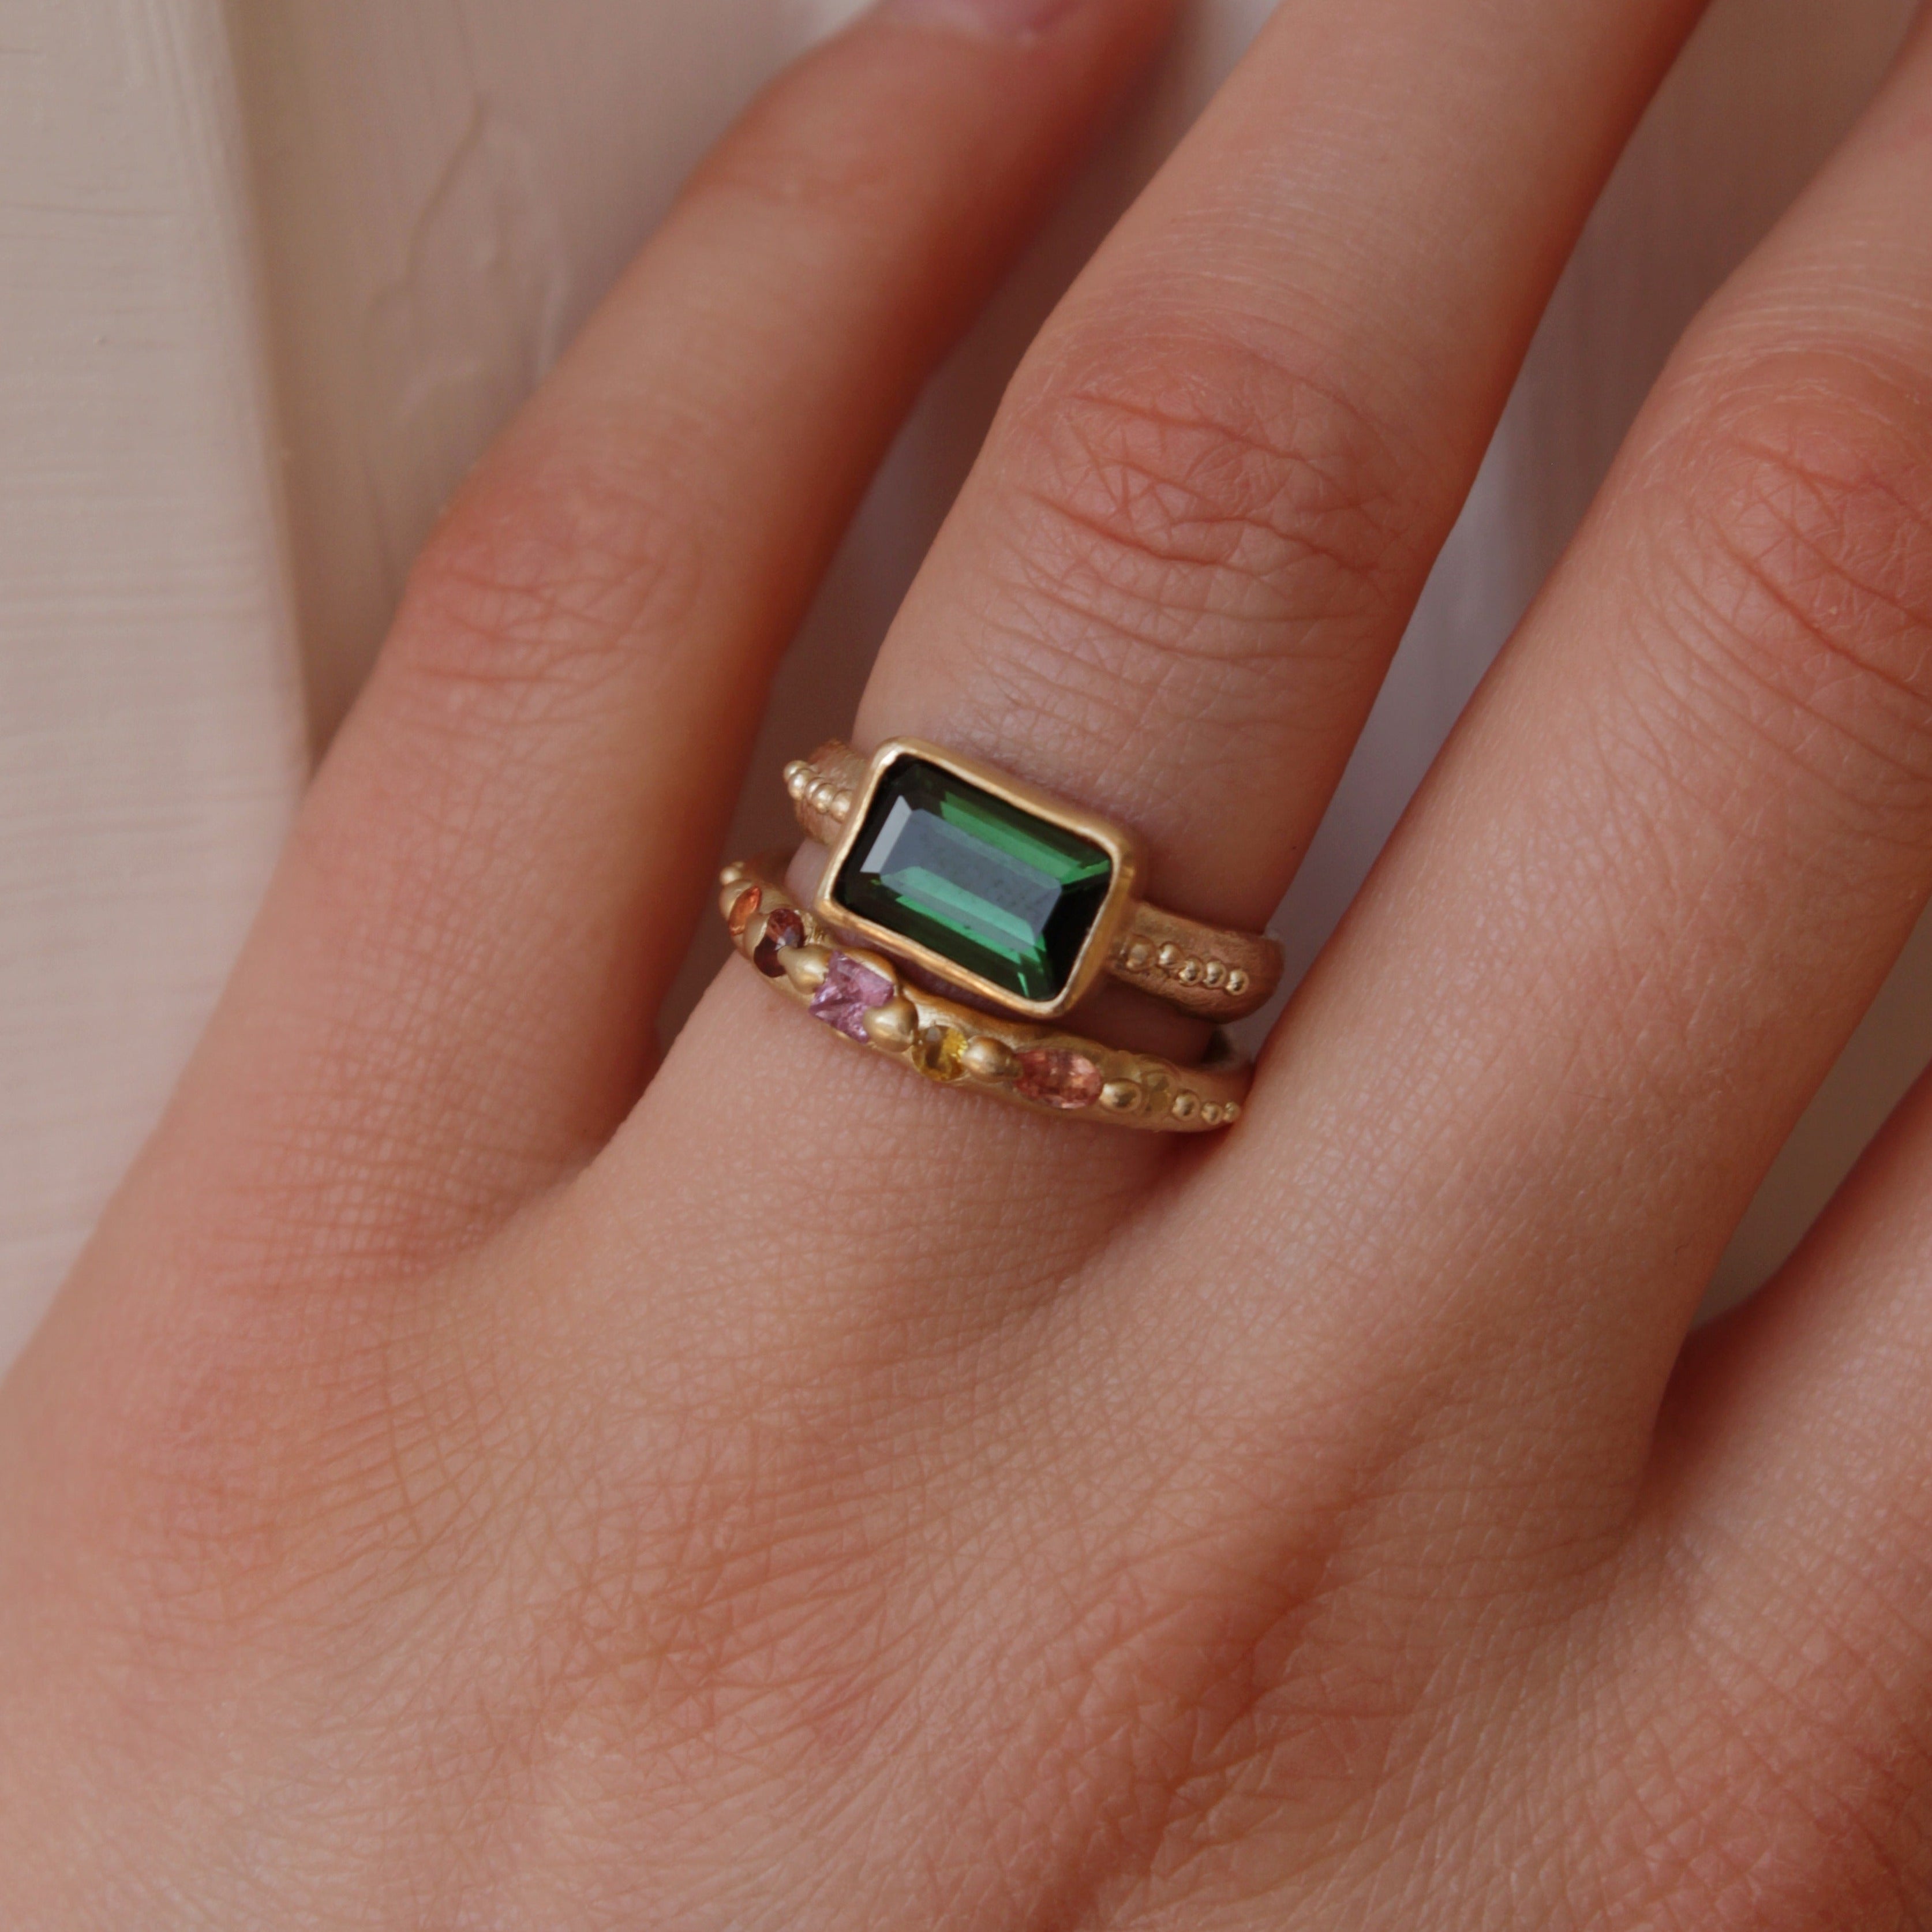 A stunning Green Tourmaline stone set on a 9 ct gold band. The band features an organic textures with tinny gold granules delicately framing the centrepiece stone.. Hand crafted alternative engagement ring by Josie Mitchell jewellery. Made in Frome, Somerset. Worn with the Sapphire wedding ring in 9 ct gold.